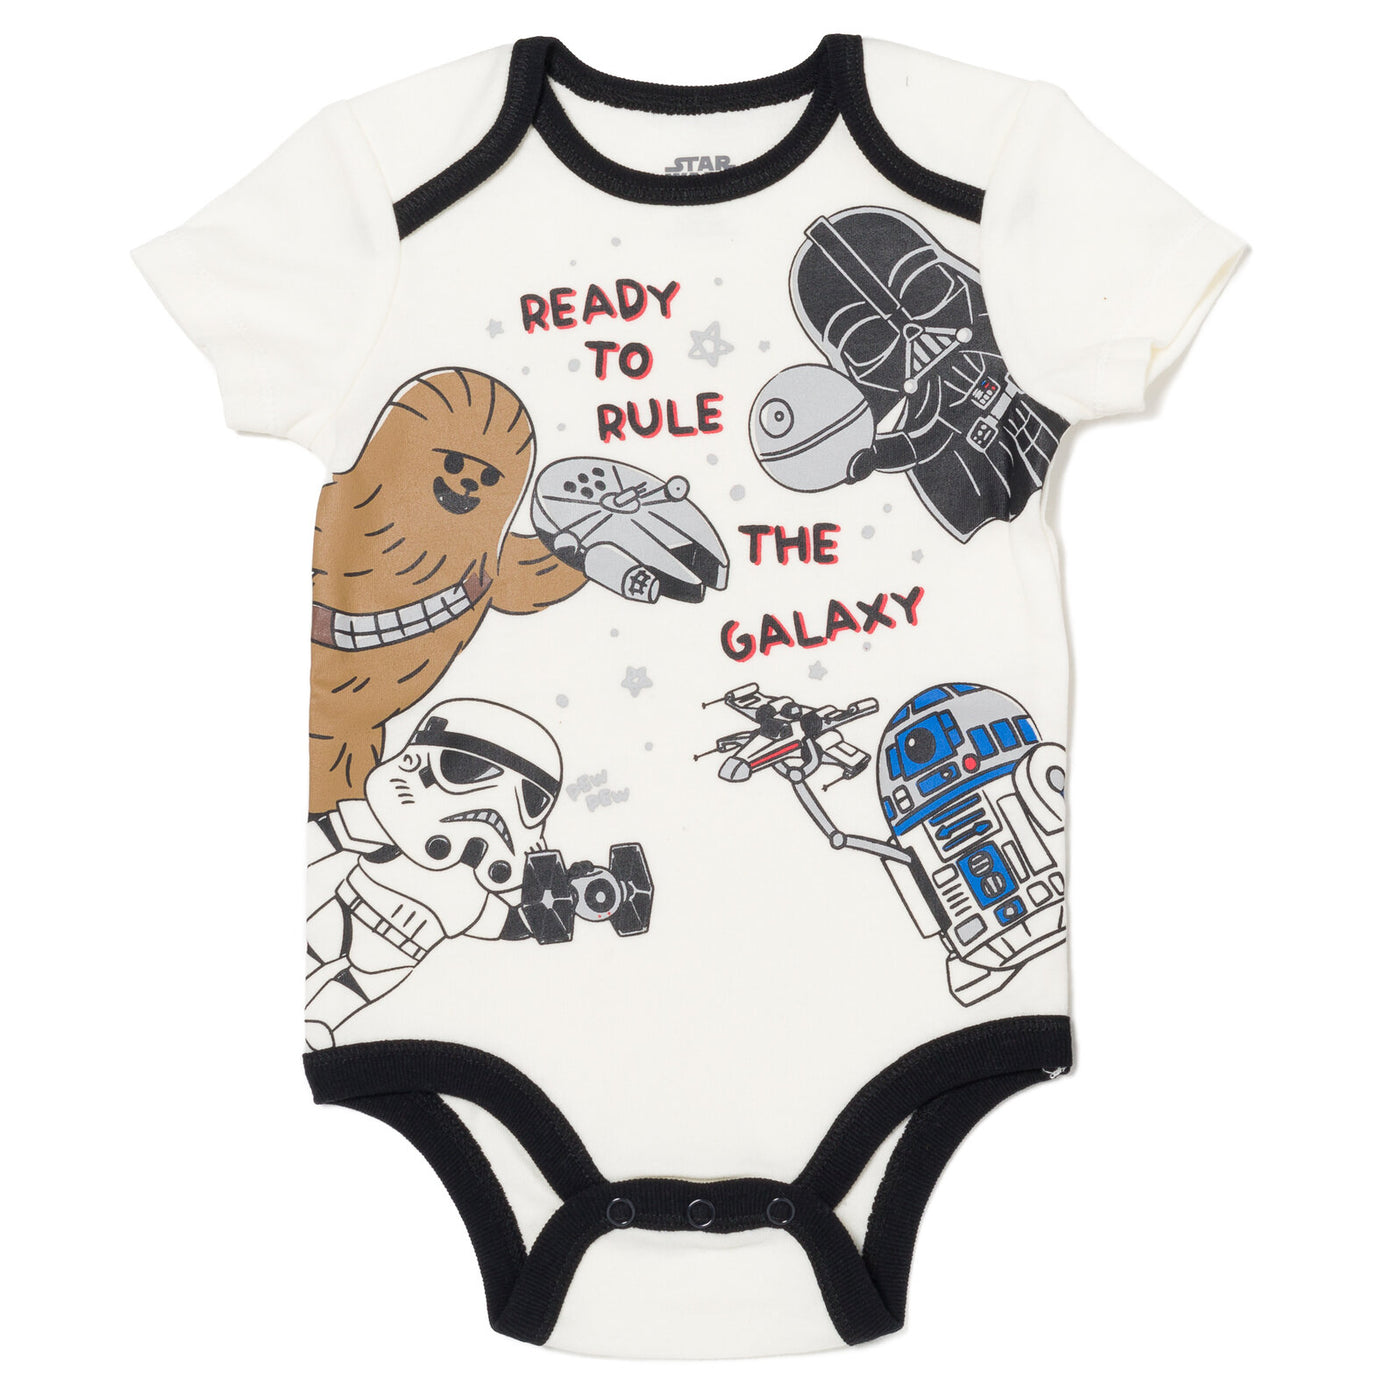 STAR WARS Bodysuit Pants and Hat 3 Piece Outfit Set